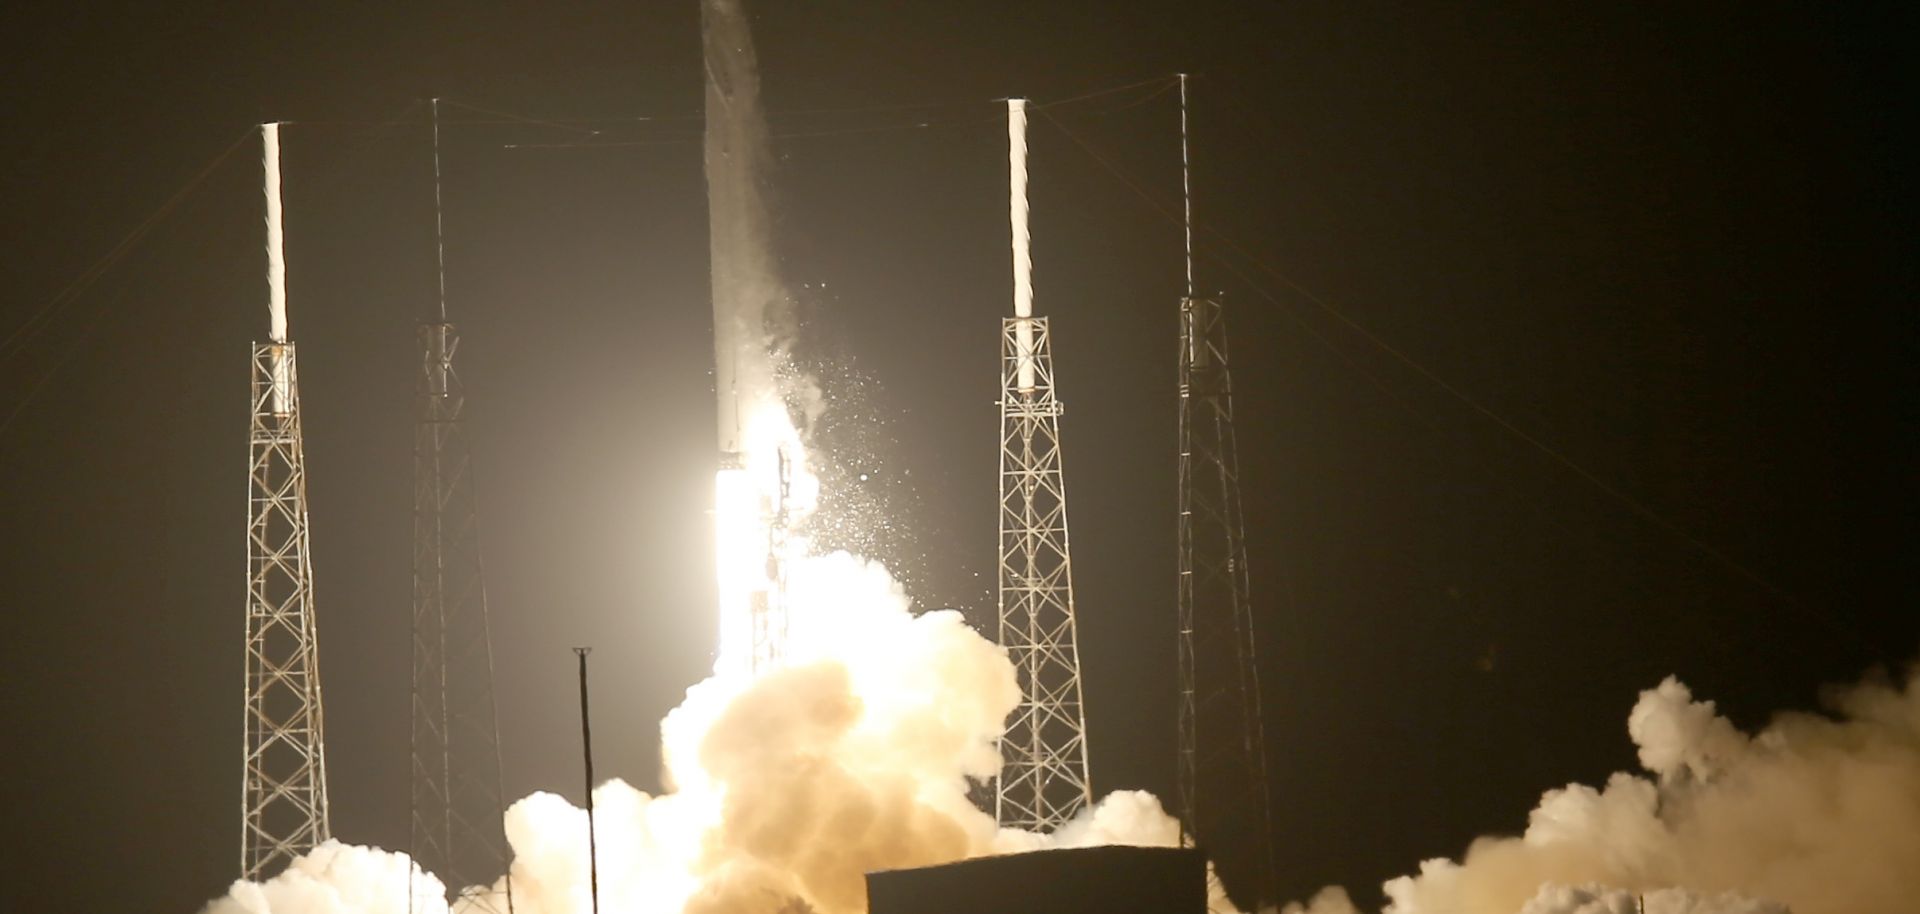 The SpaceX Falcon 9 rocket takes off.